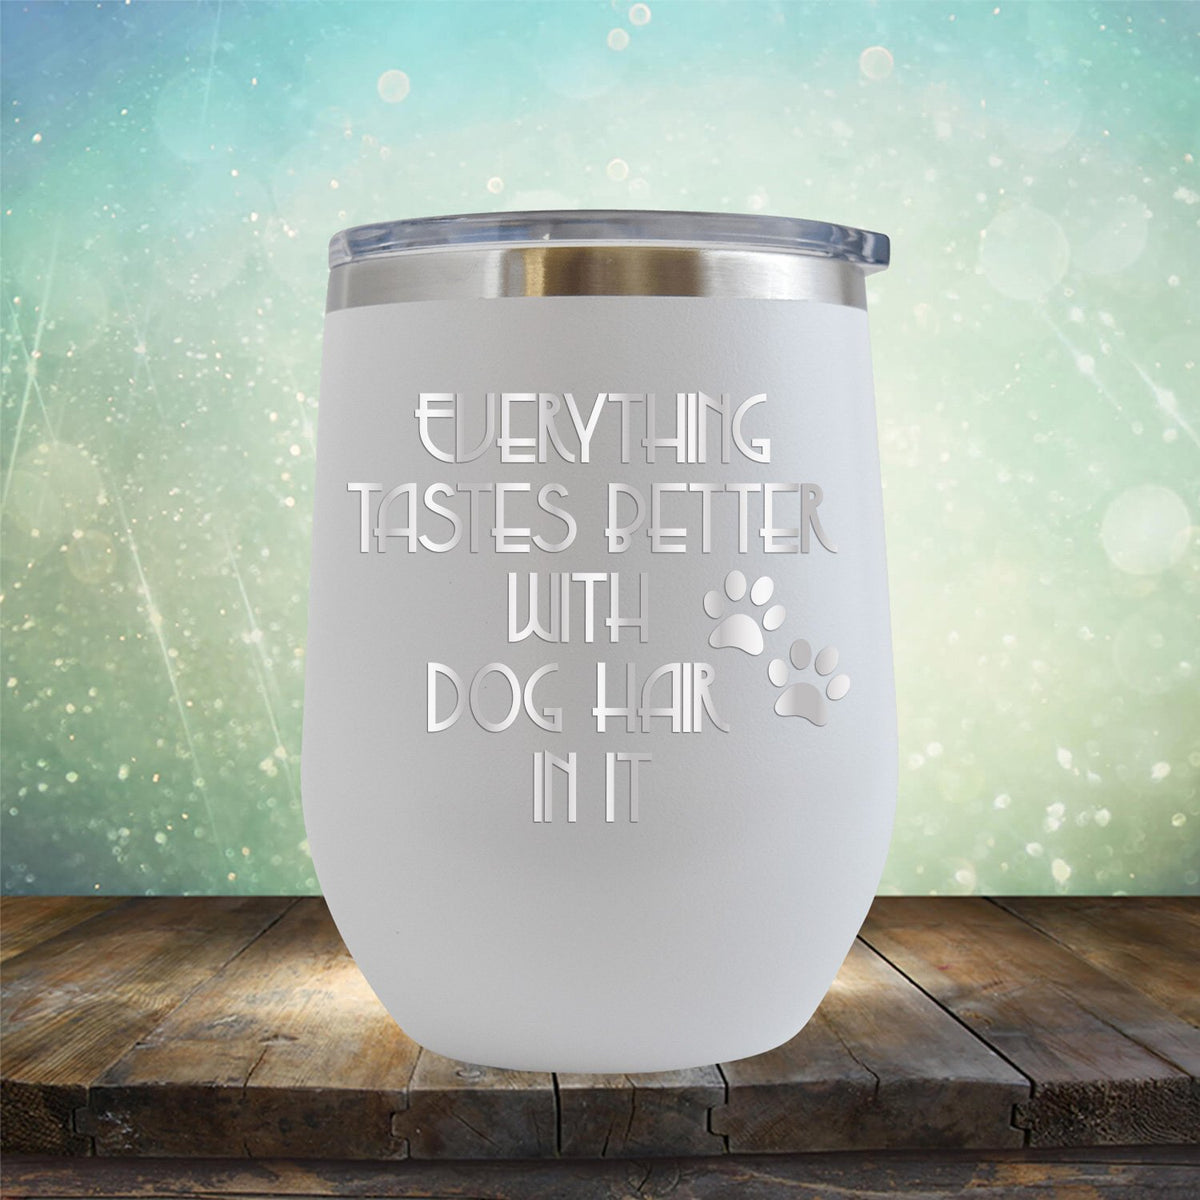 Everything Tastes Better with Dog Hair in It - Stemless Wine Cup